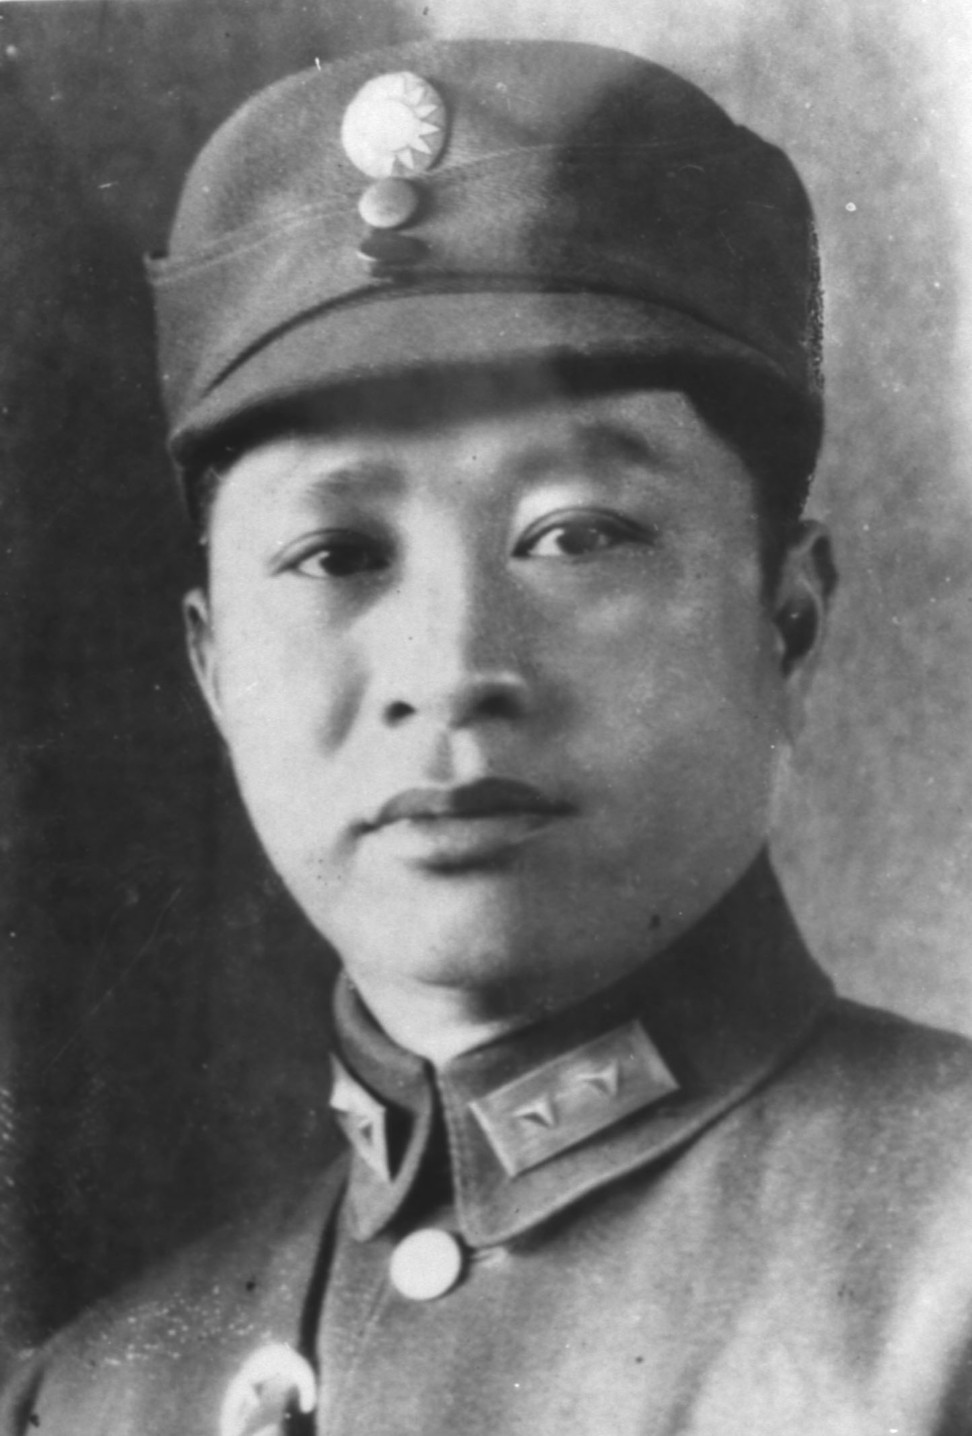 Ye Ting (1896-1946) is one of the military leaders featured in the film, which has been criticised by his grandson. Photo: Handout